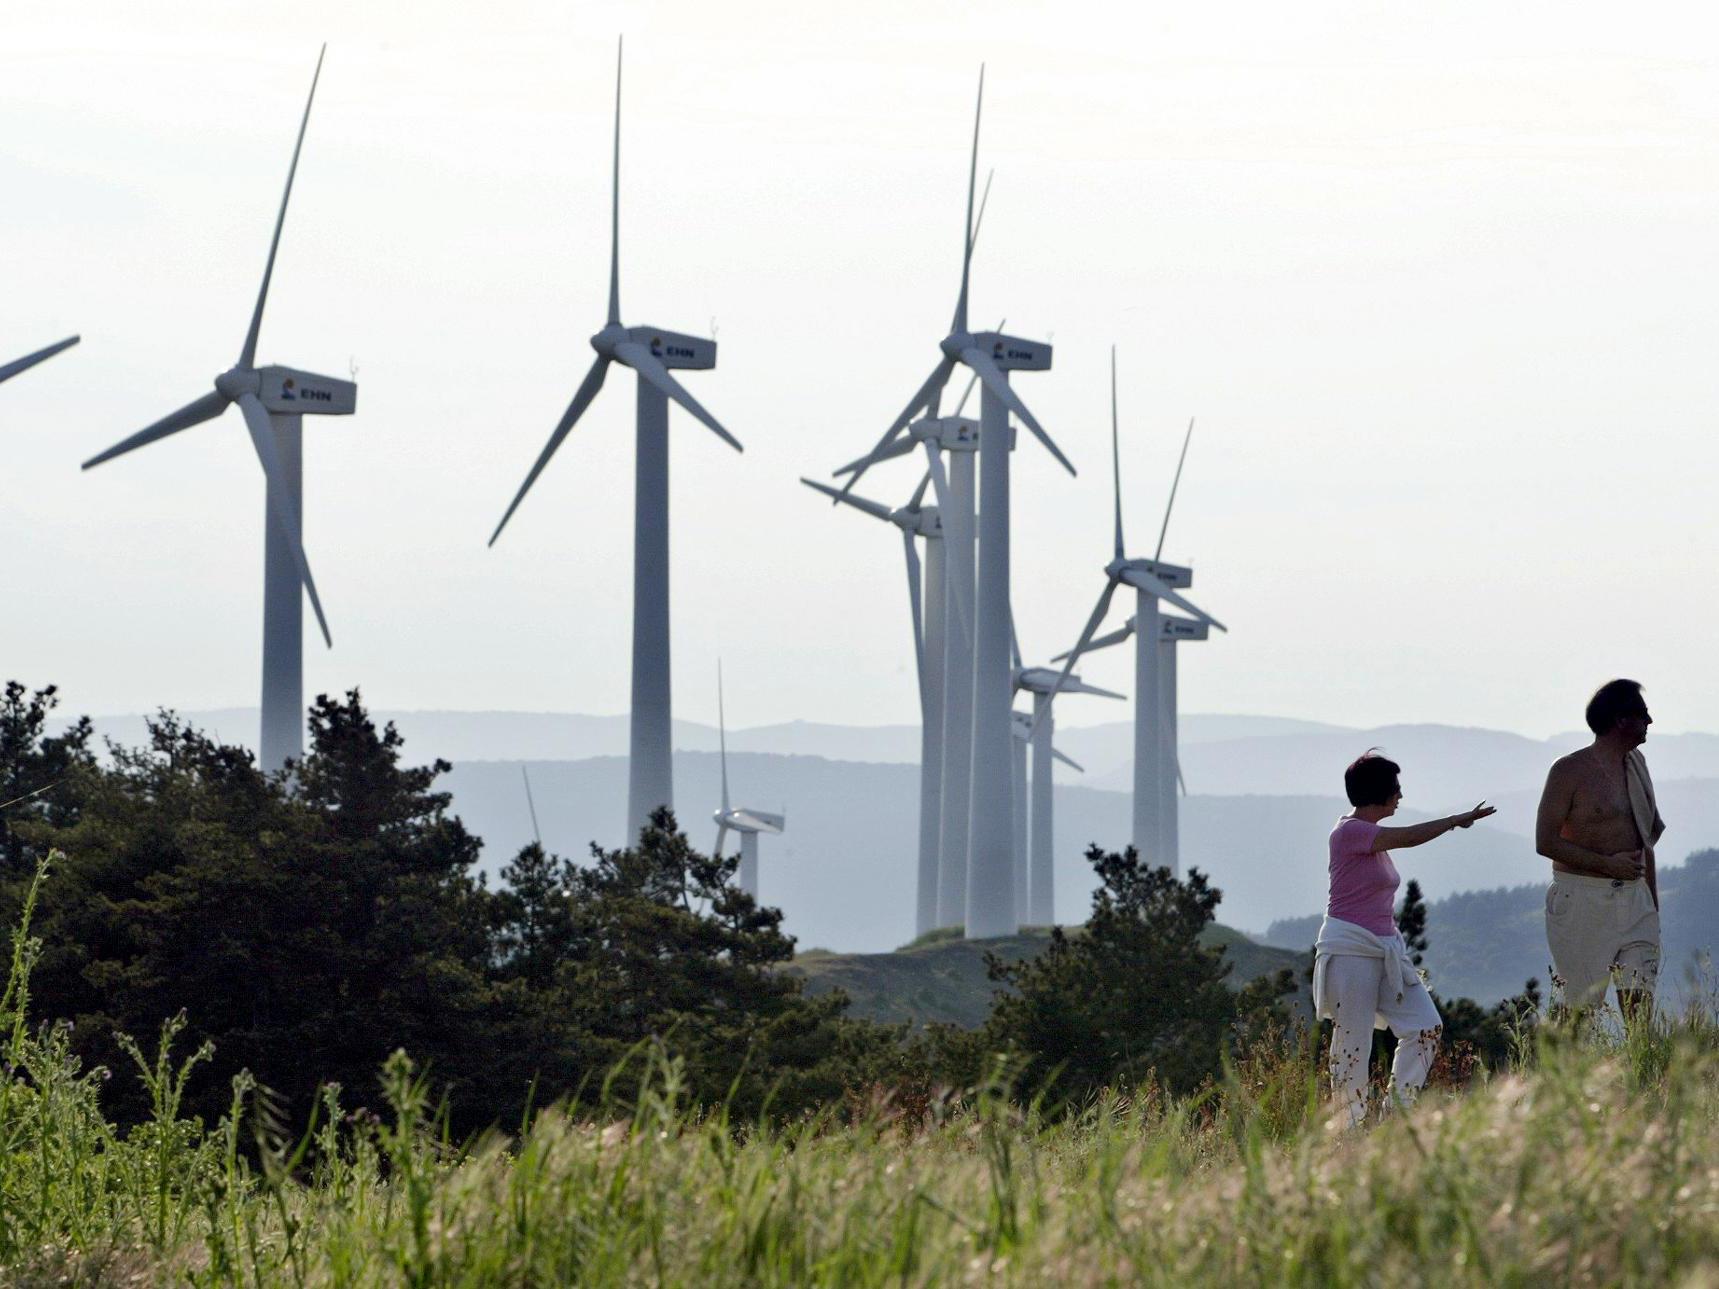 Spain intends to massively invest in wind and solar over the next decade